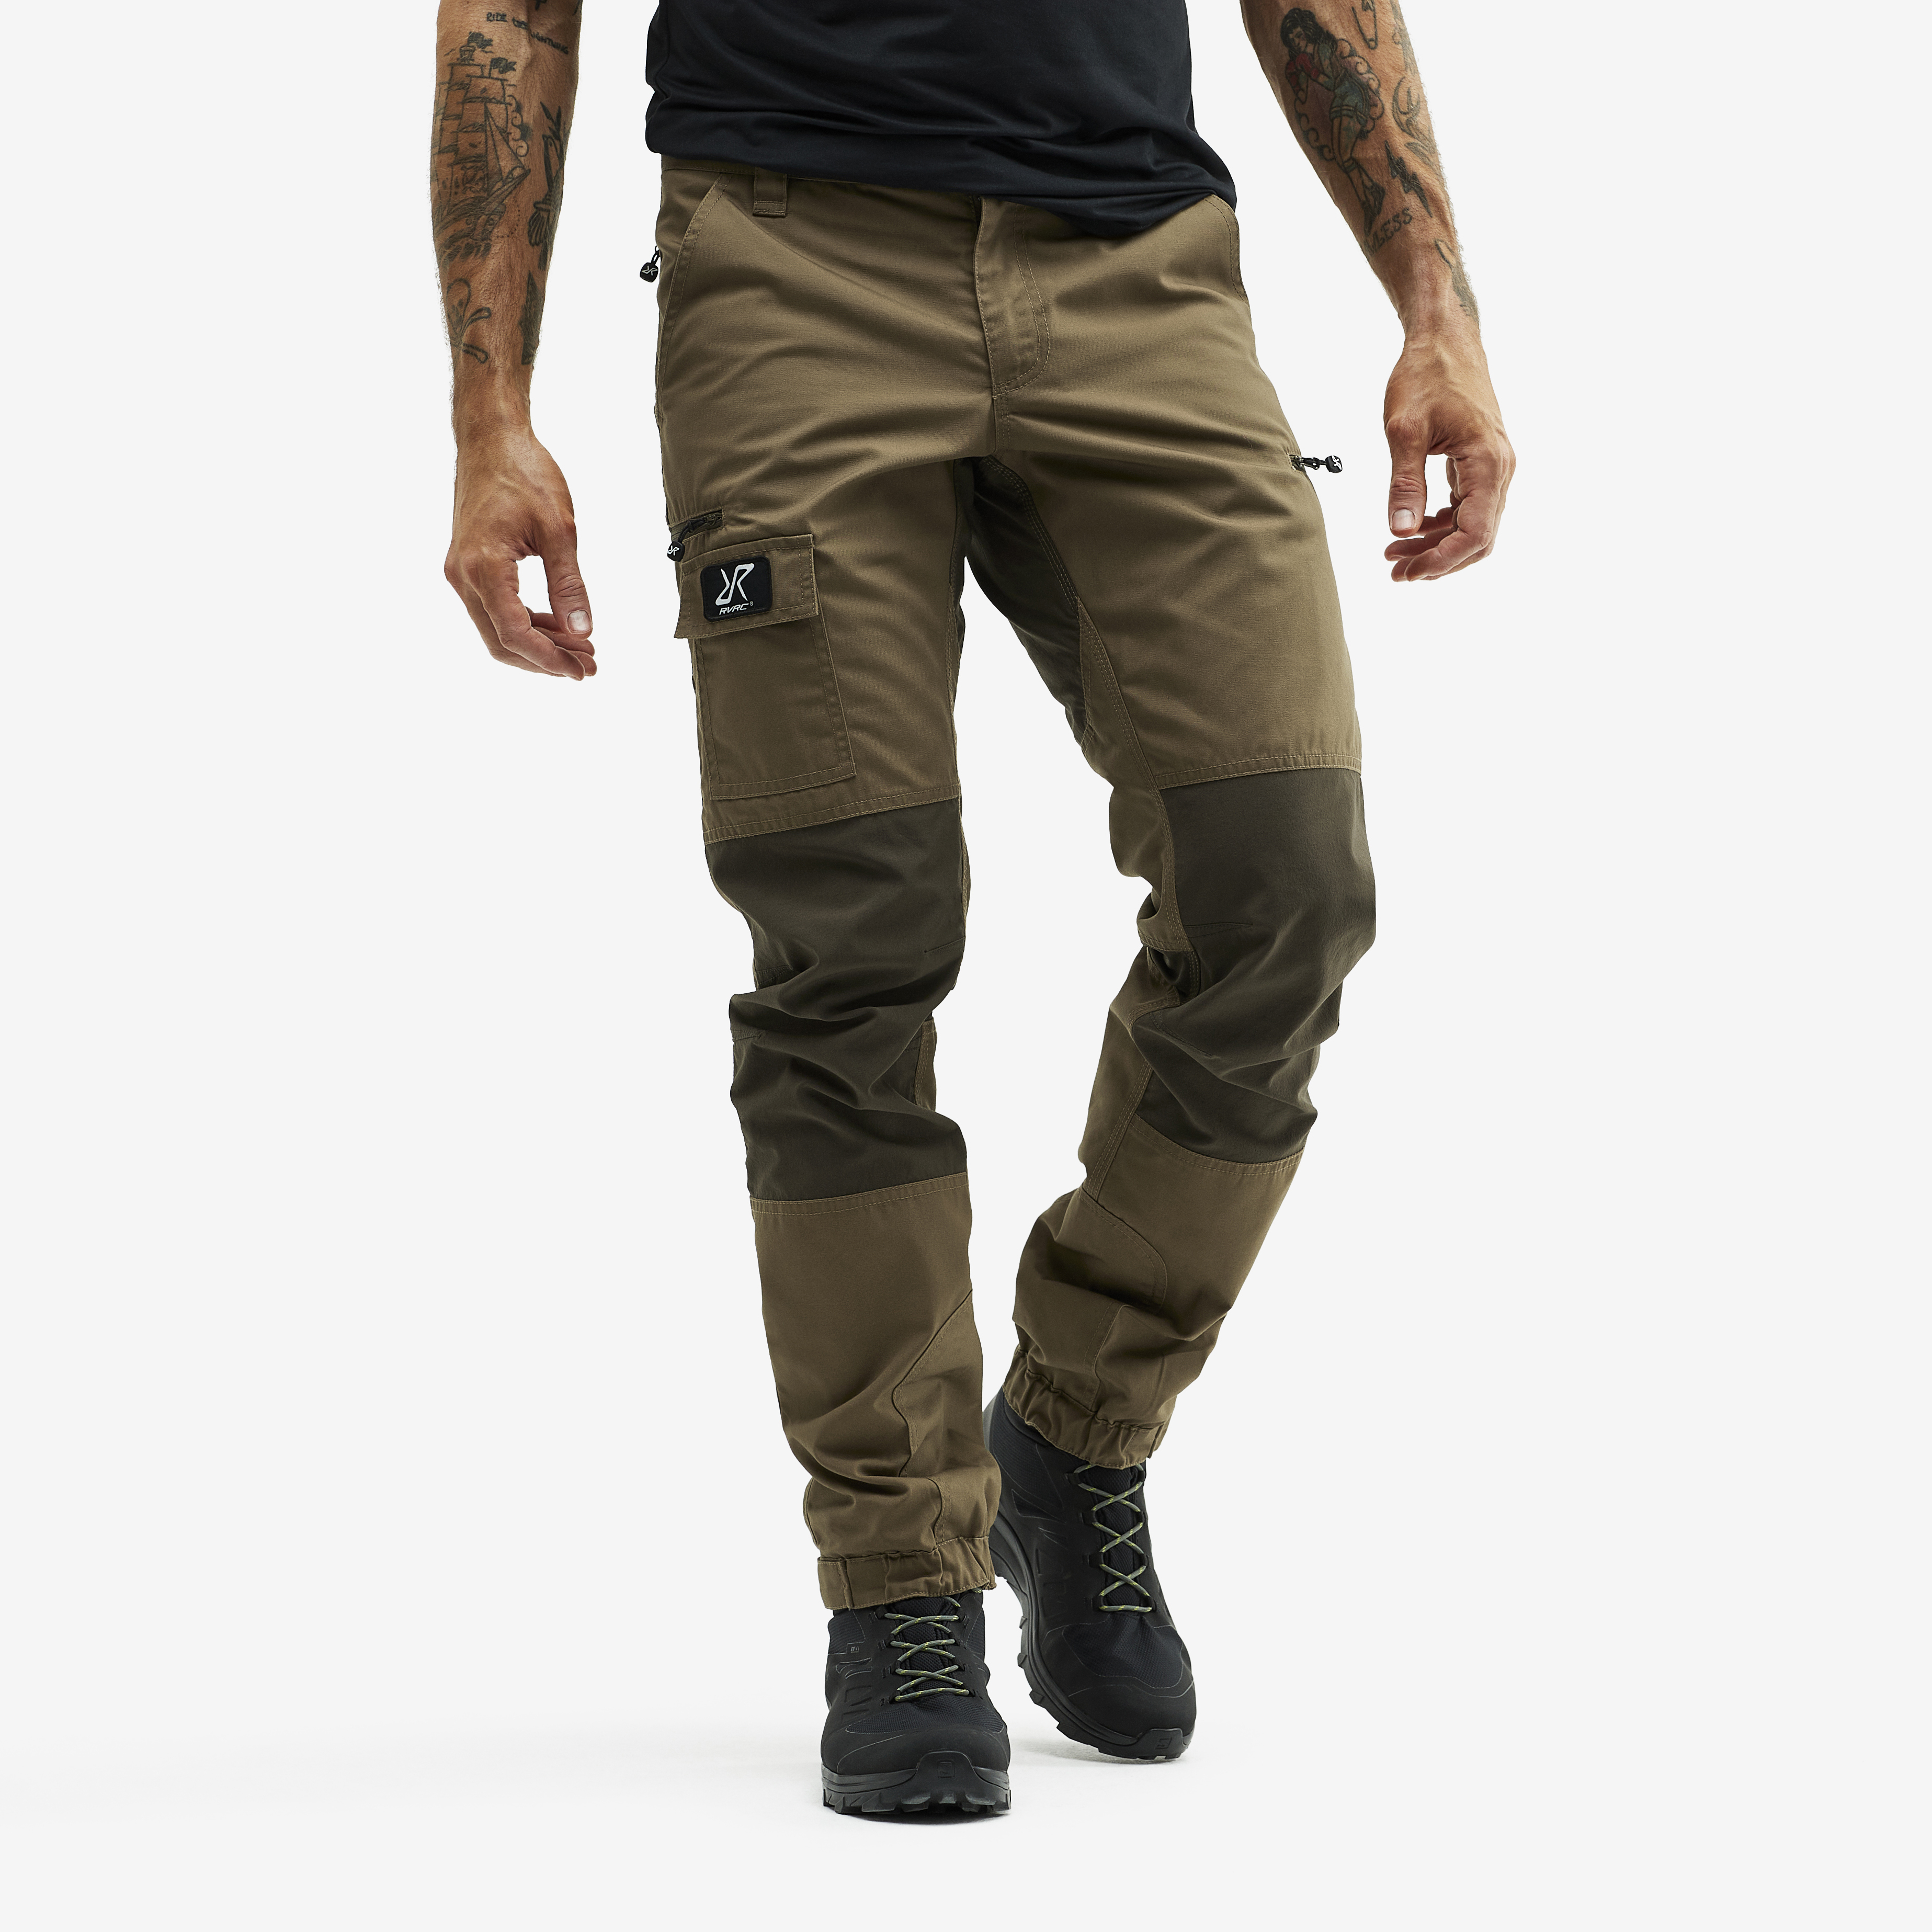 Nordwand Pants Cub Homme